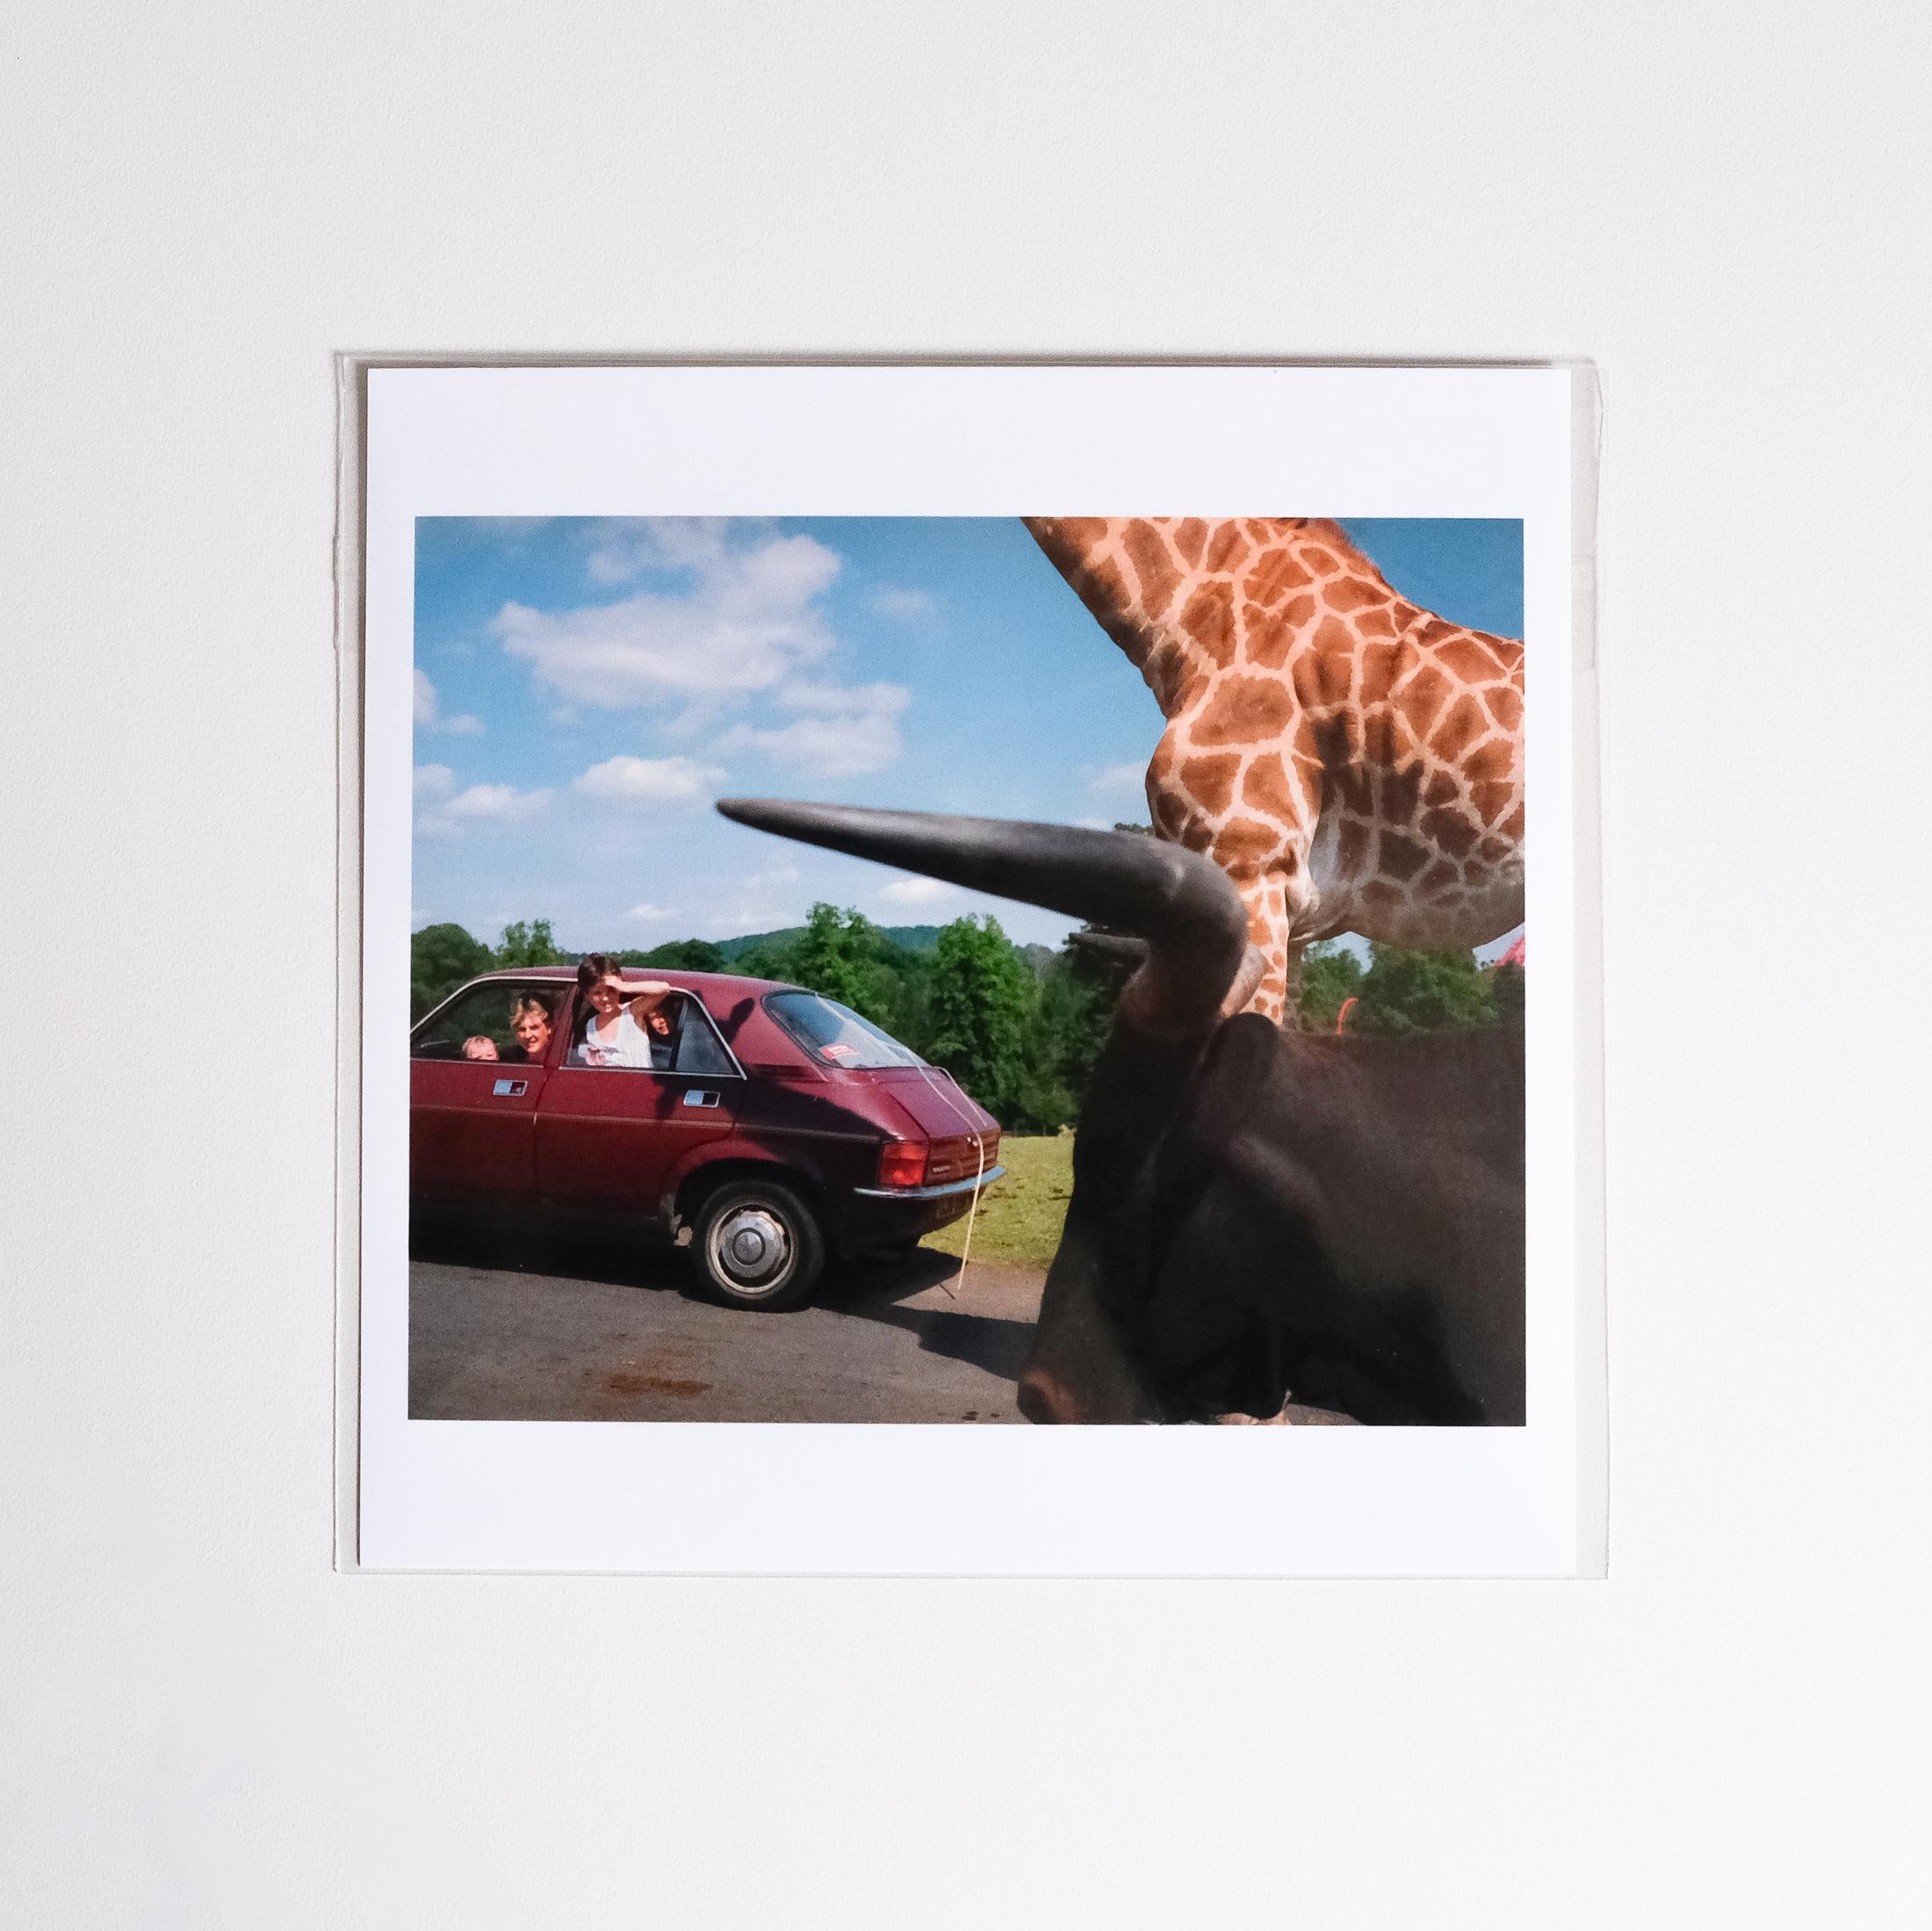 For sale an original signed museum-quality Magnum 6x6 photographic print by MARTIN PARR (British, born 1952). 

Titled 